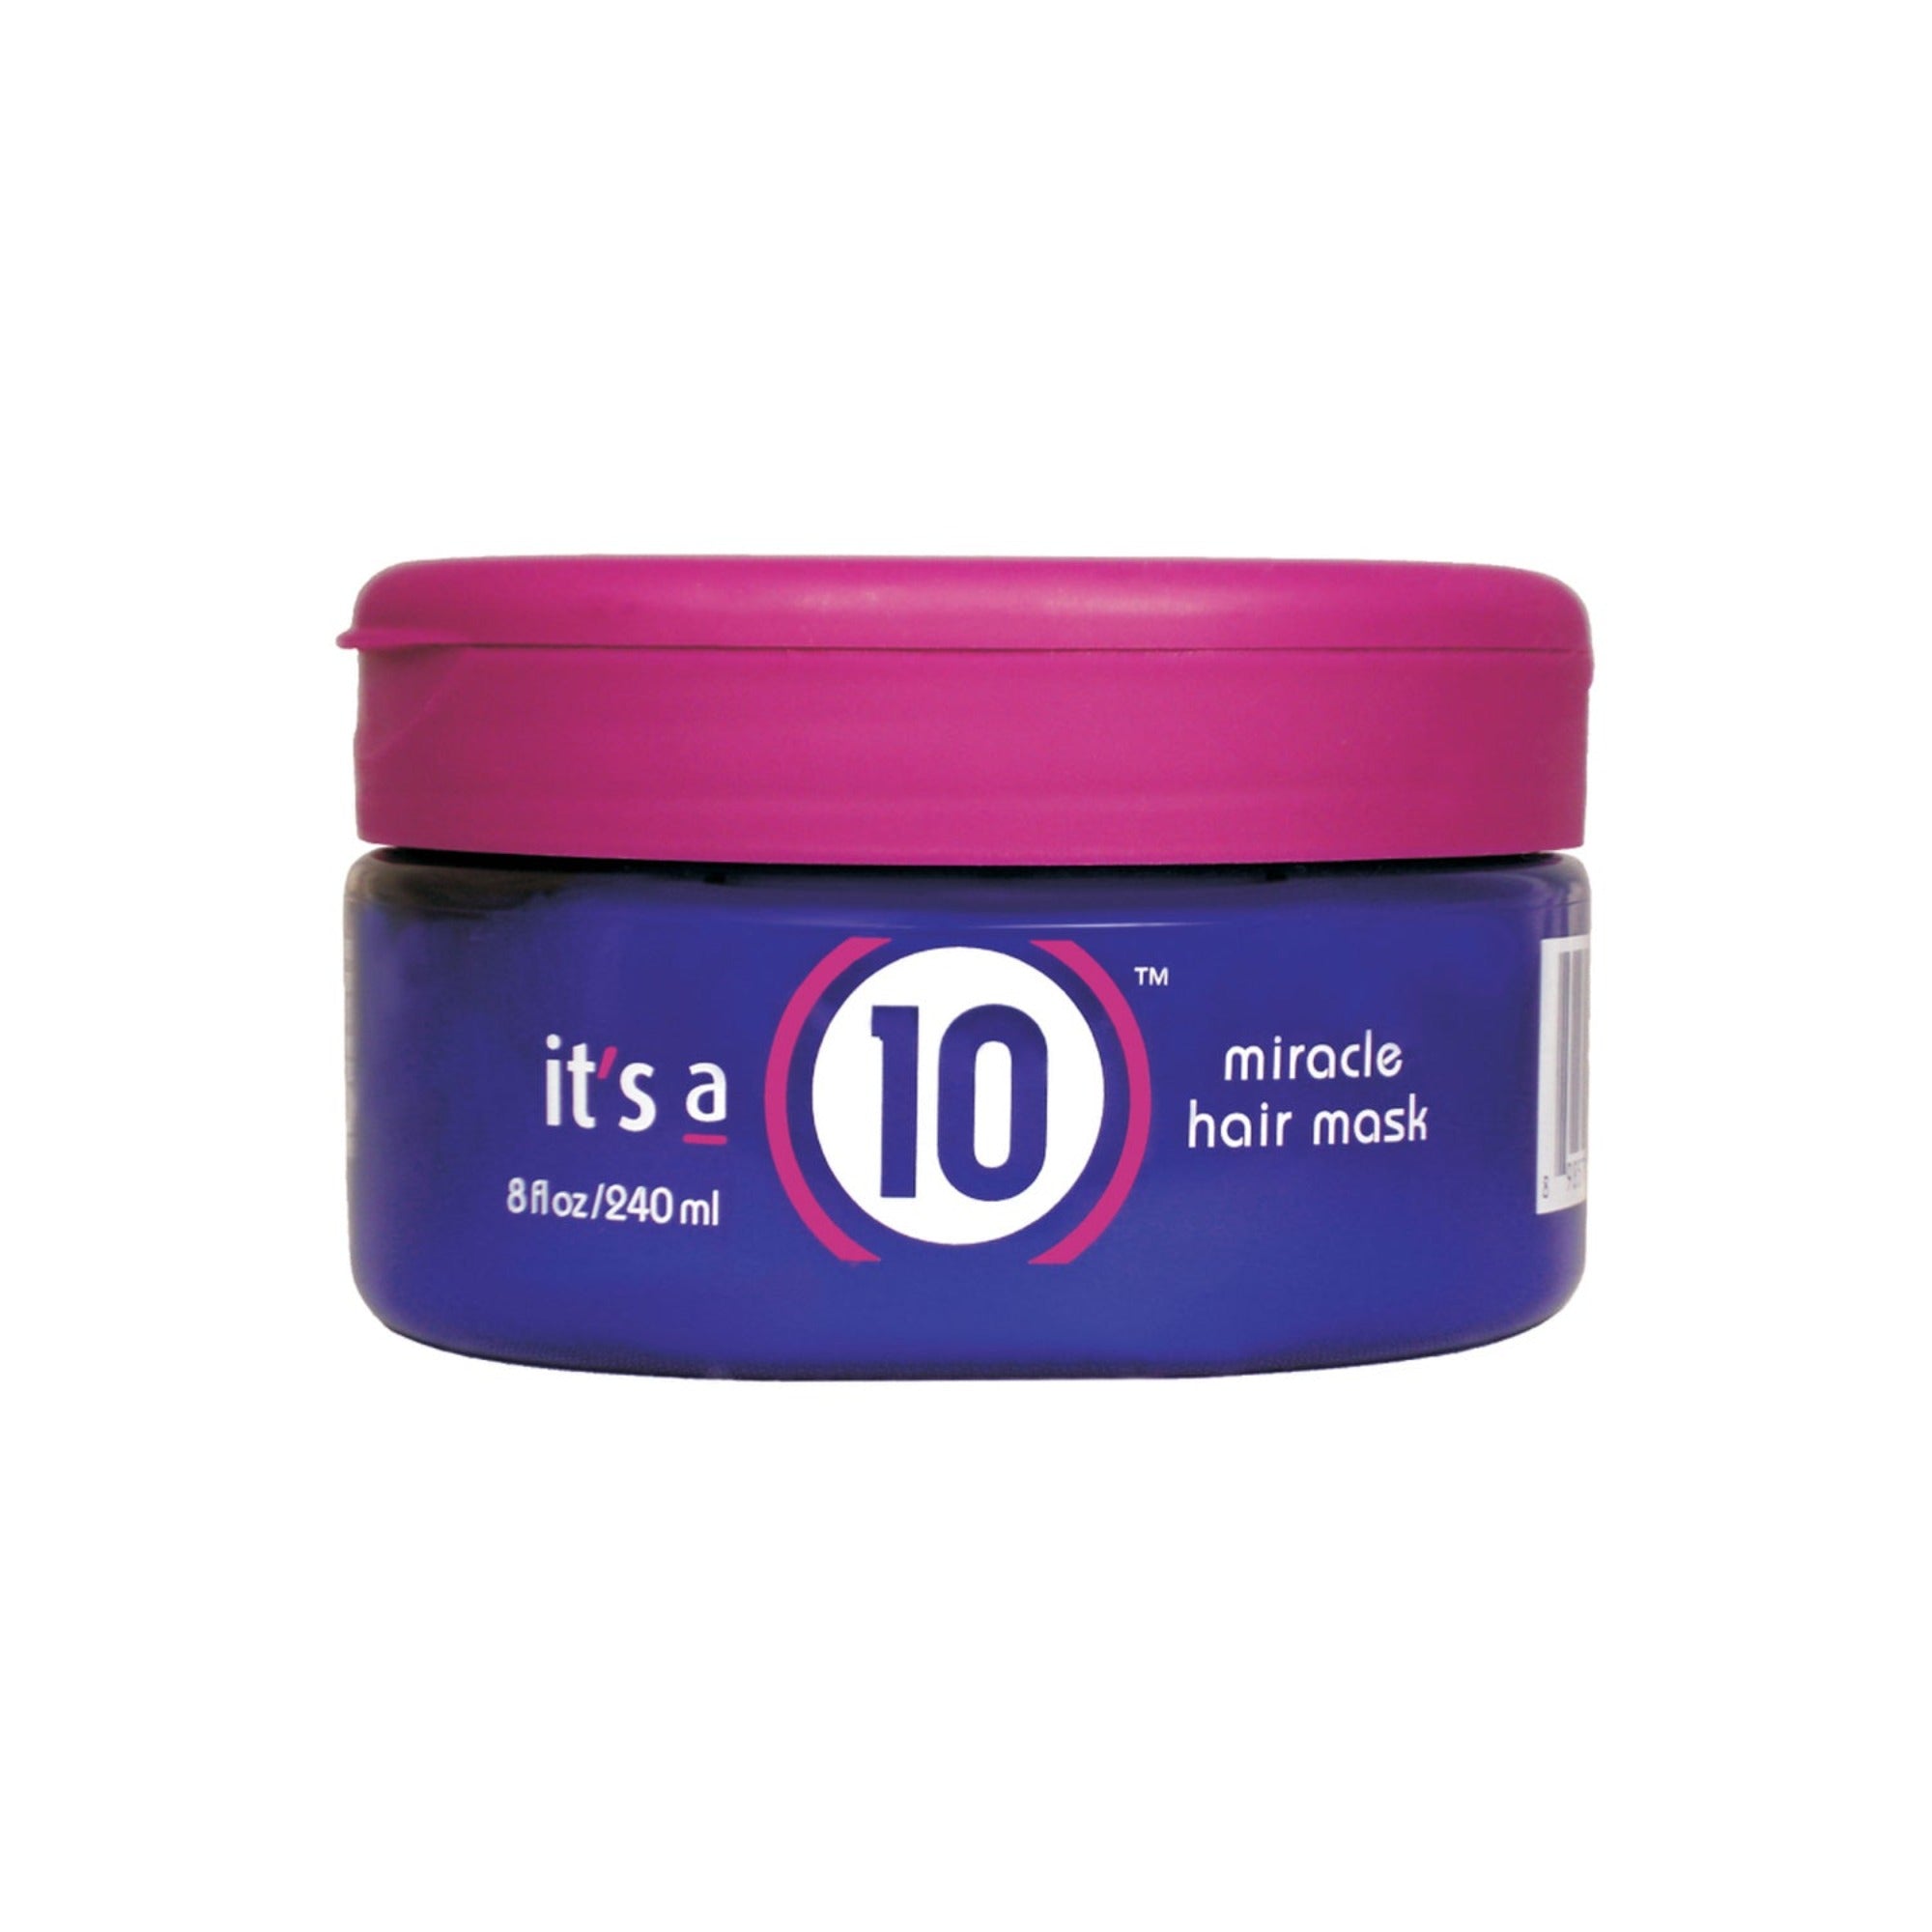 ITS A 10 Miracle Hair Mask buy to IndiaIndia CosmoStore